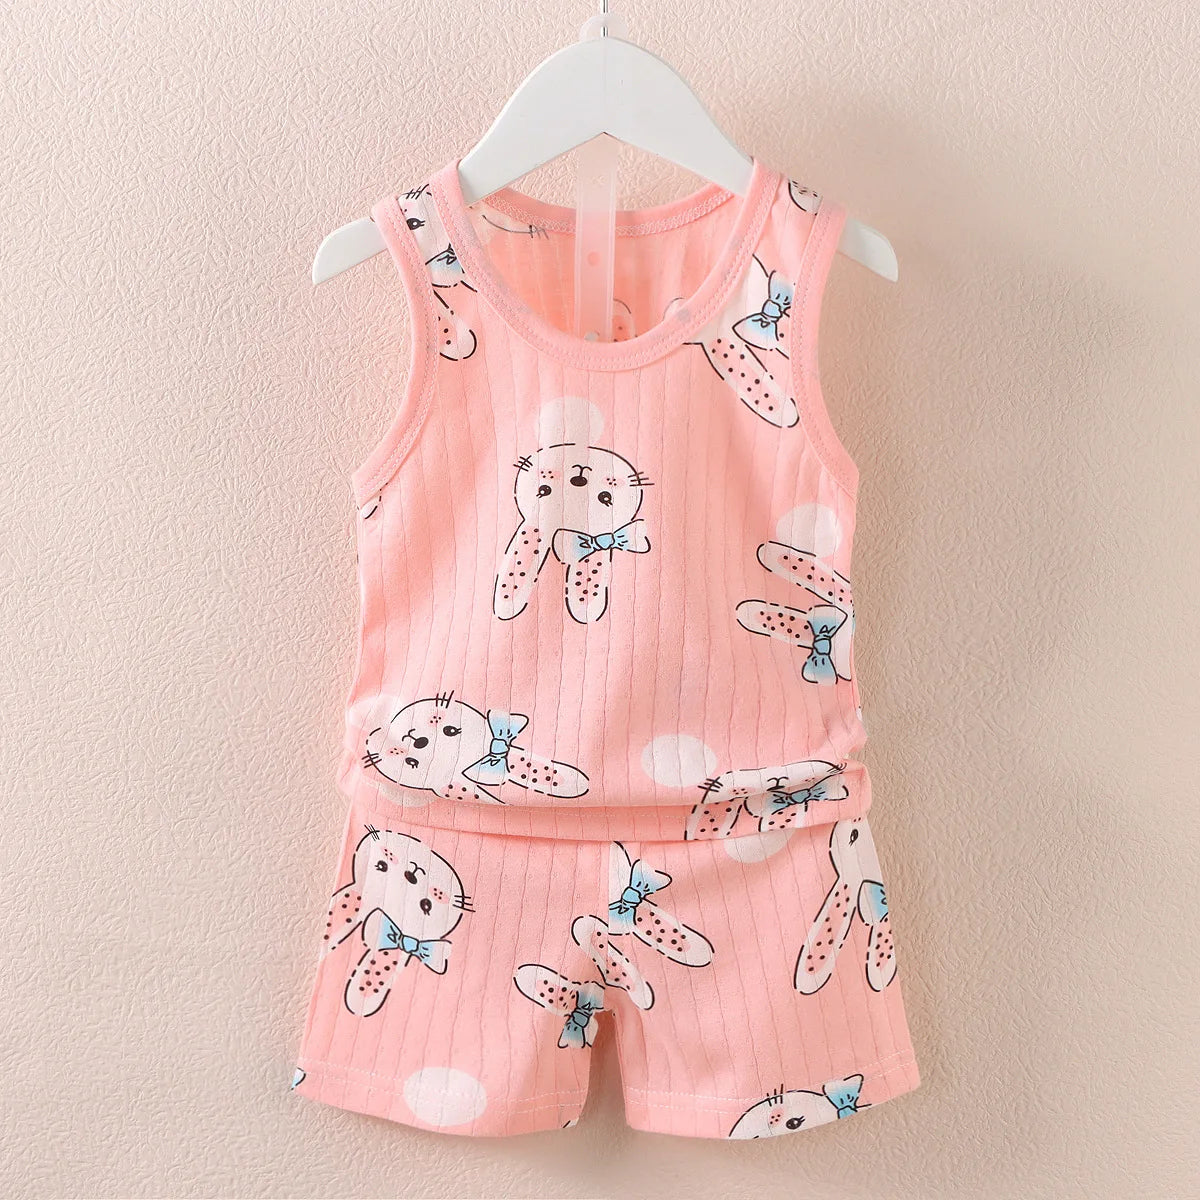 Children's Clothing Print Sleeveless Tops Shorts Cute Breathable Kids Summer Vest Shorts Set Tank Top for Baby Clothing Children